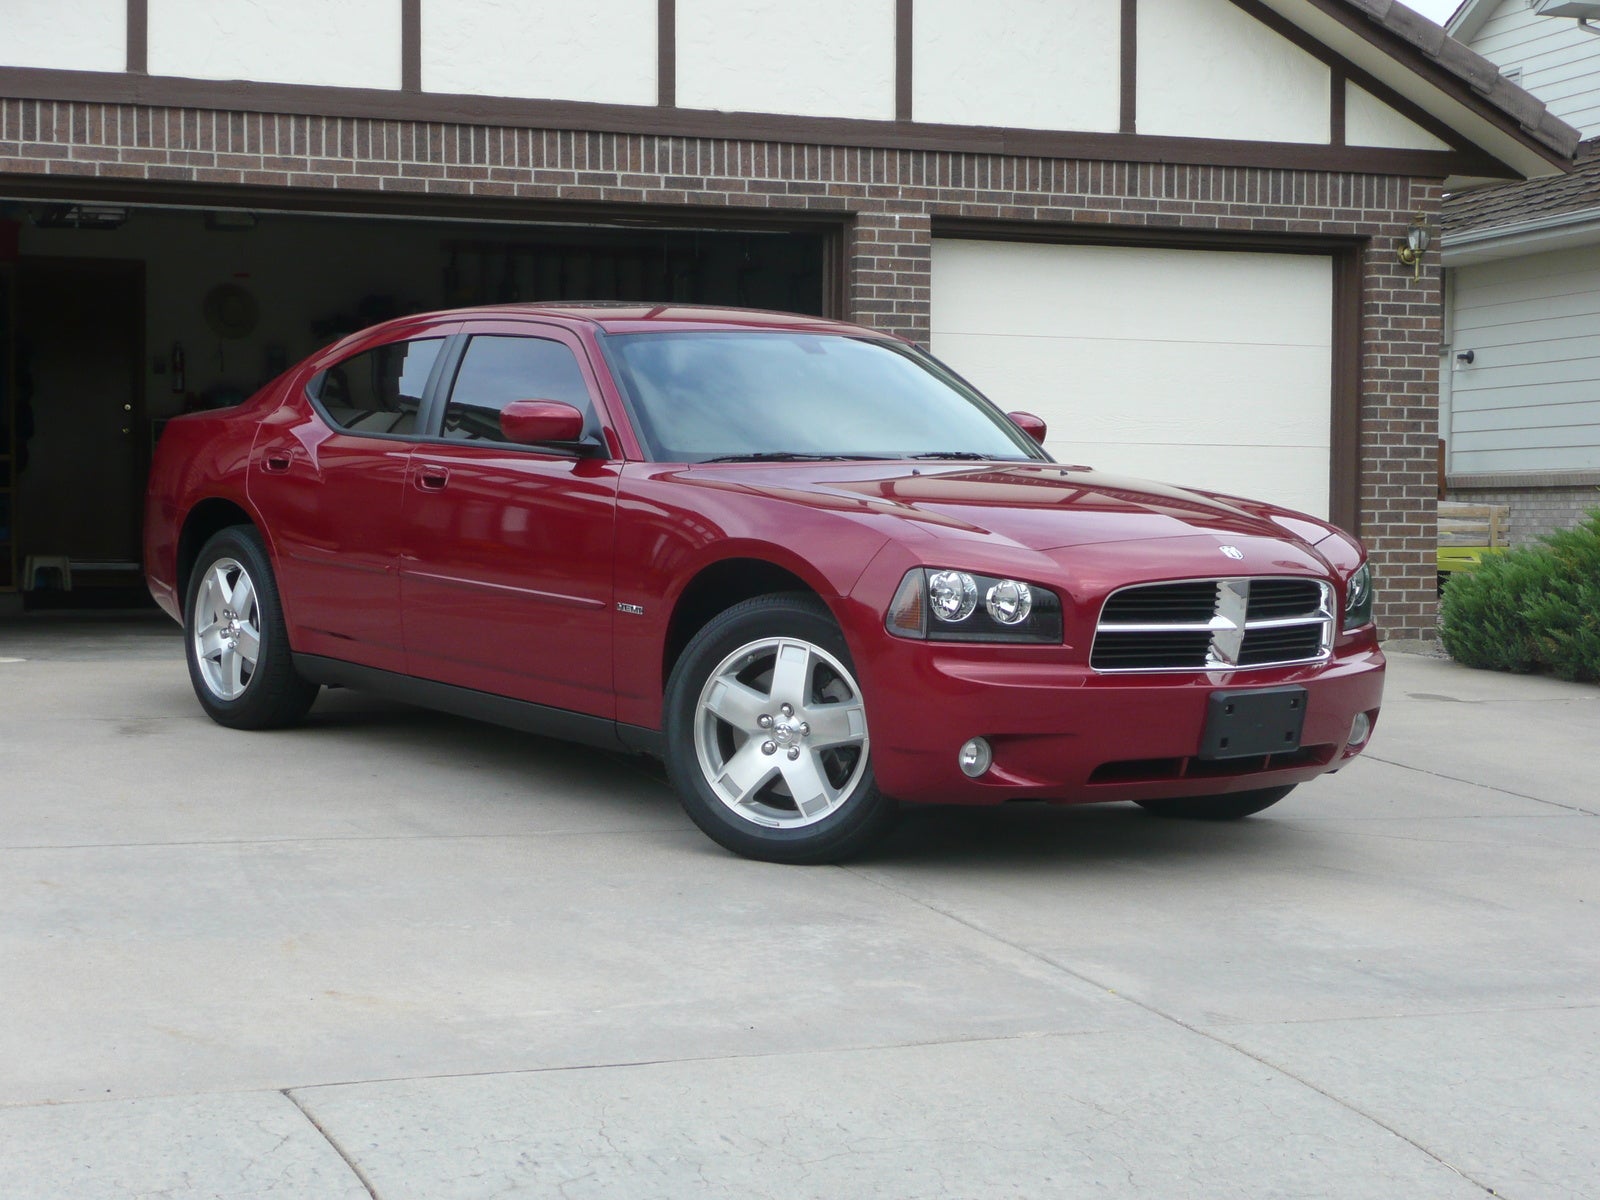 2007 Dodge Charger R/T AWD - Pictures - 2007 Dodge Charger R/T AWD pic ...